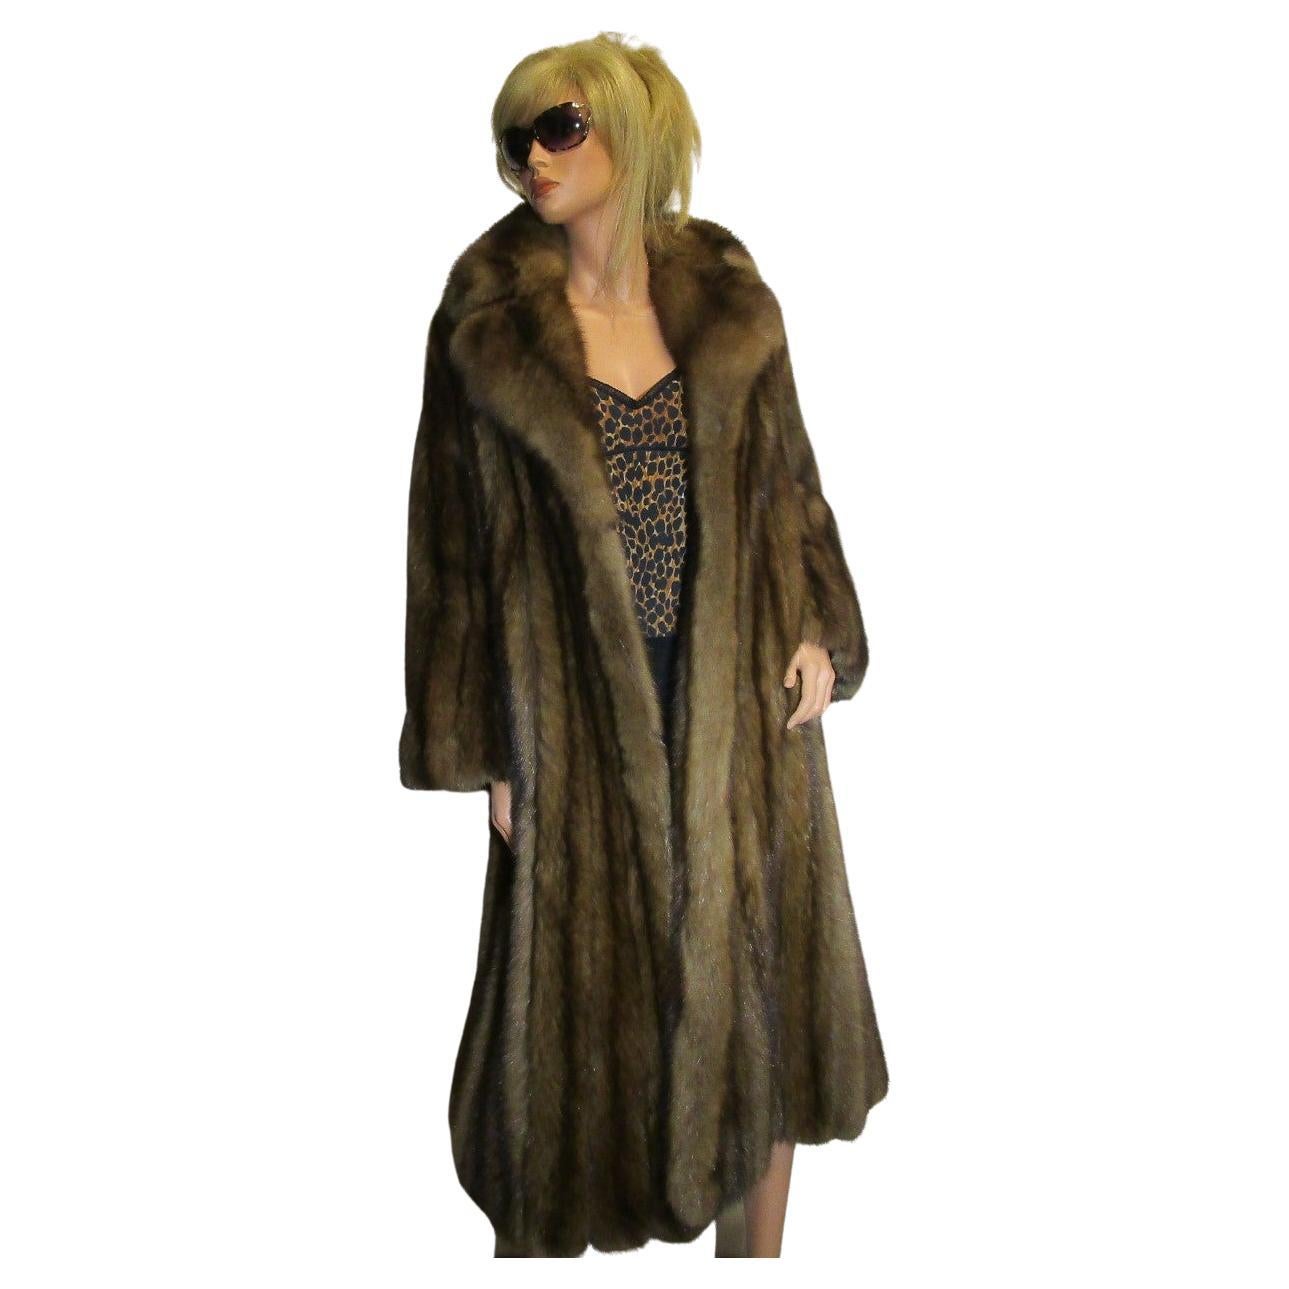 Gorgeous Christian Dior Russian Sable Fur Coat with the authentic label of: ChristianDiorFurs
This is an incredible and rare piece of Dior's history in the fur market.  This coat was made in the 1980s and this time period was known as the 'Golden